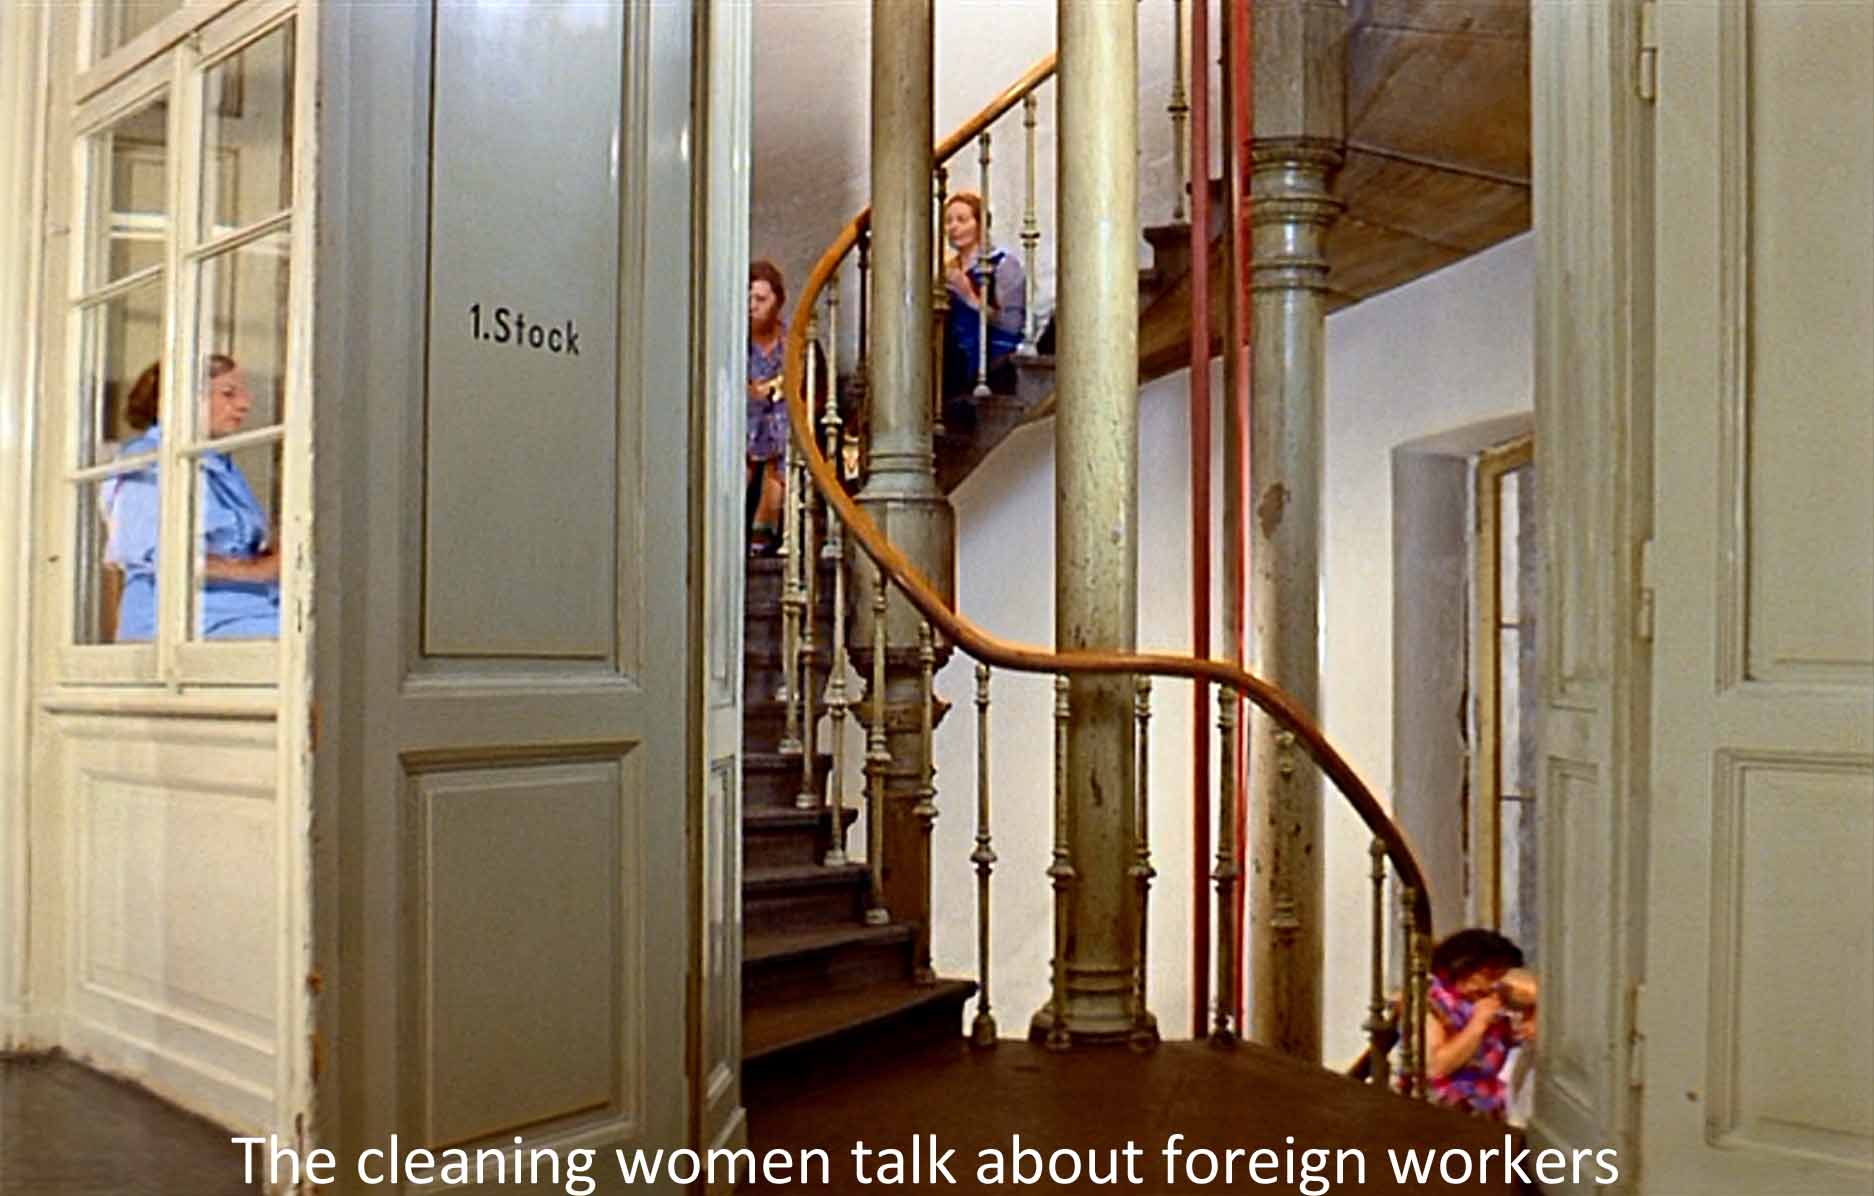 The cleaning women talk about foreign workers